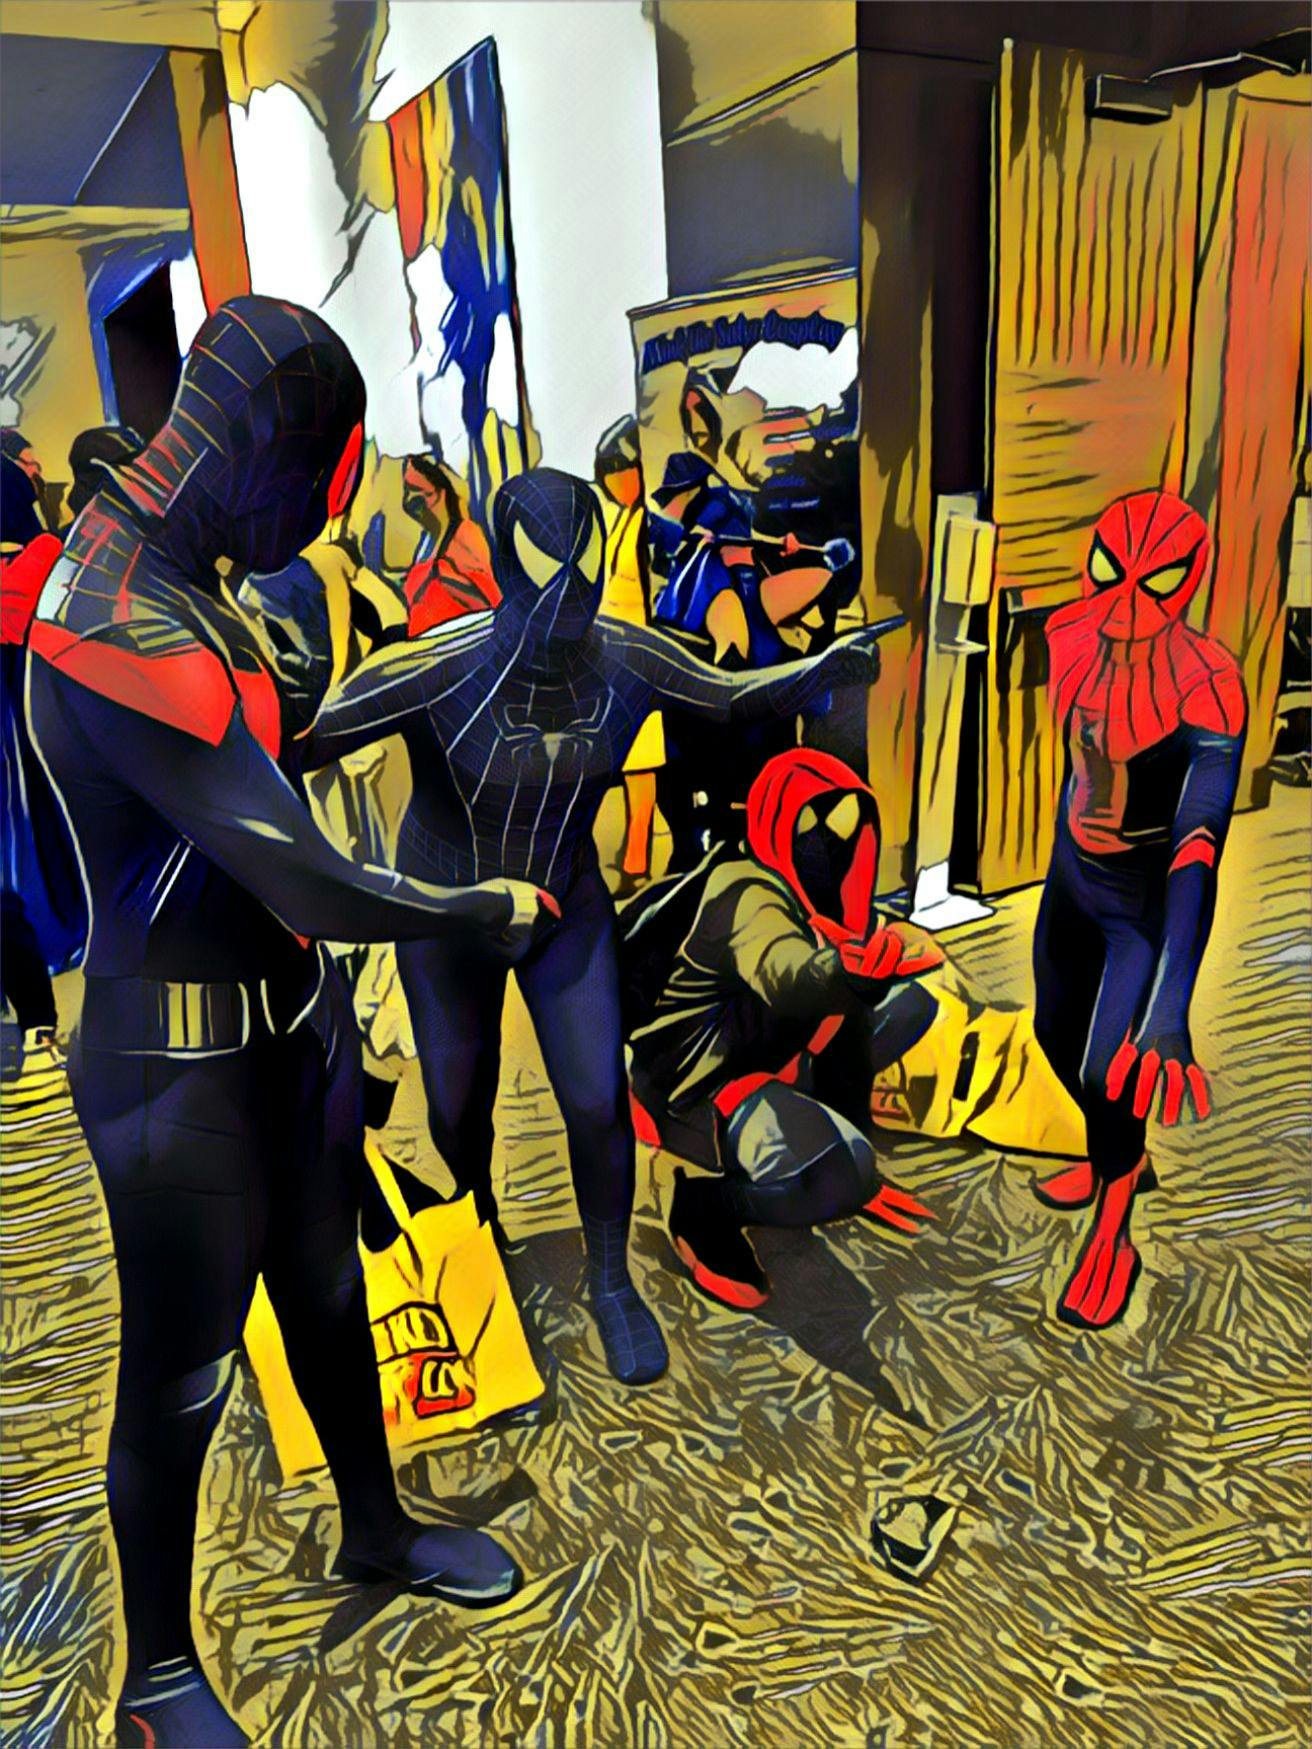 Edited Spiderman cosplays at Wicked Comic Con Boston